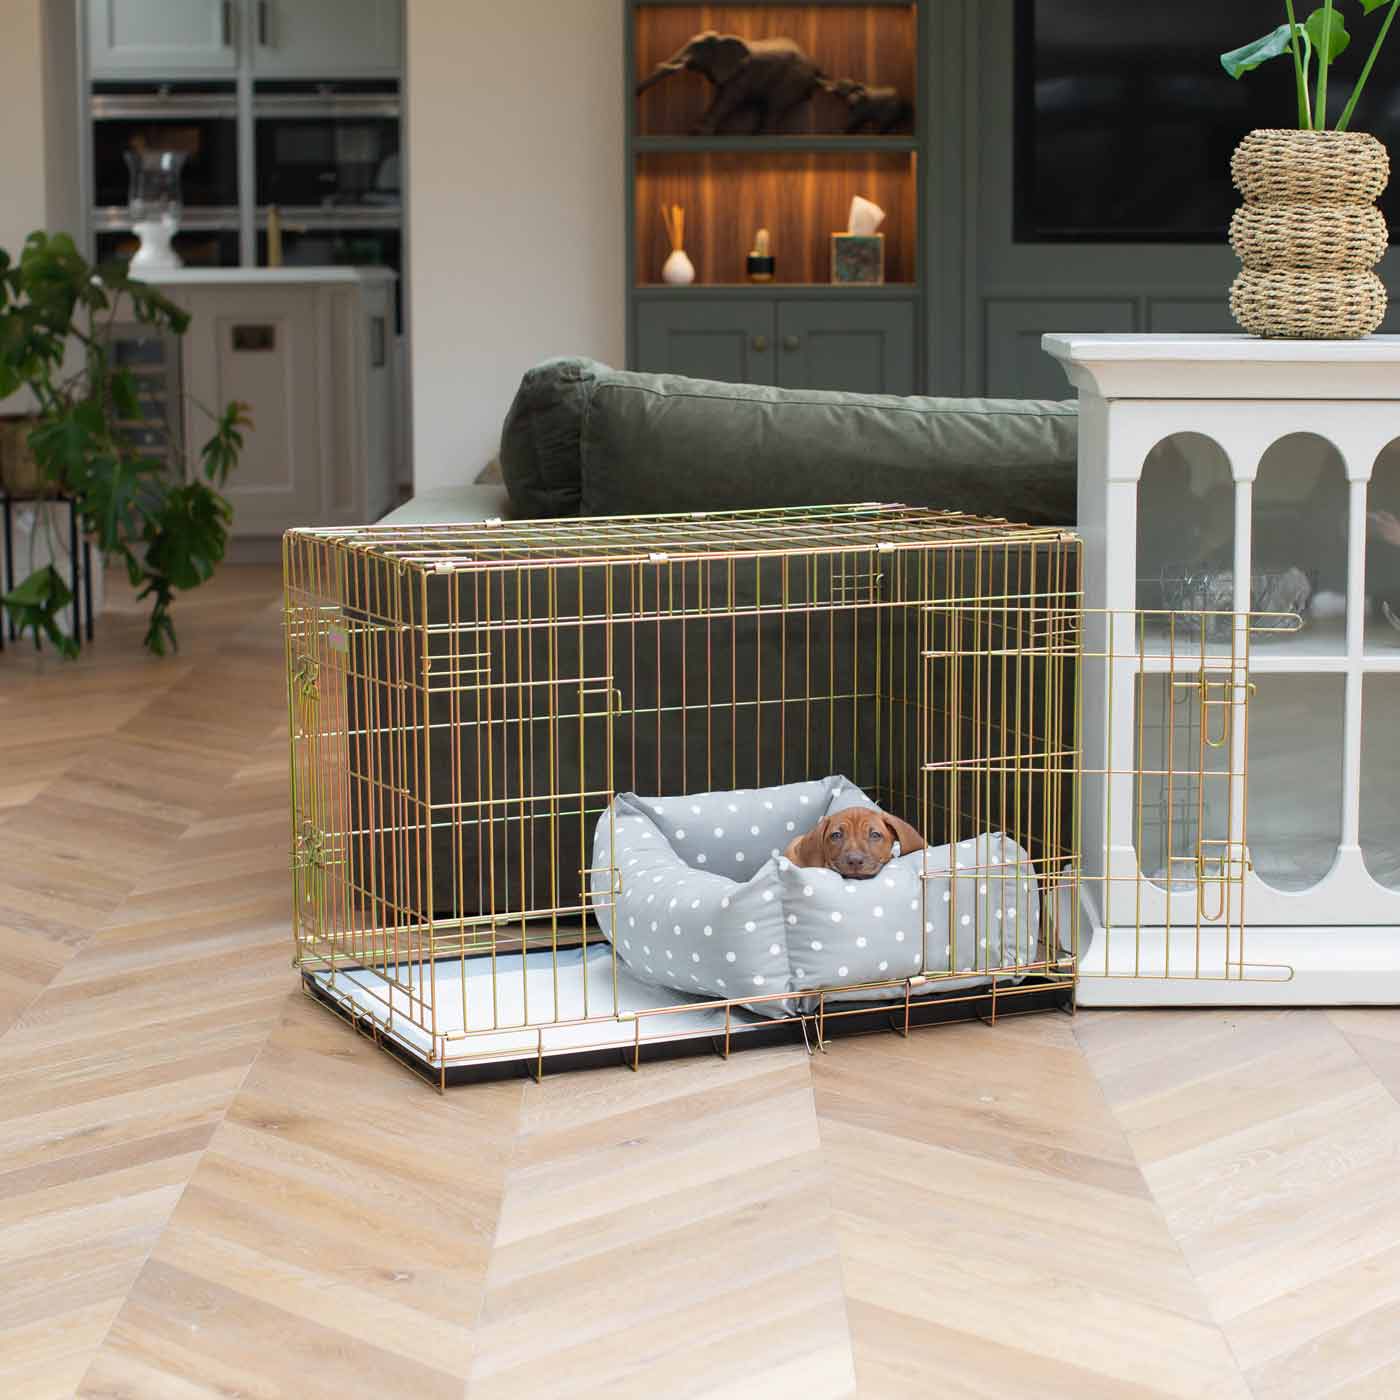 Luxury Gold Dog Cage With Cozy & Calm Puppy Cage Dog Bed, in Grey Spot. The Perfect Dog Crate For The Ultimate Naptime, Available Now at Lords & Labradors US